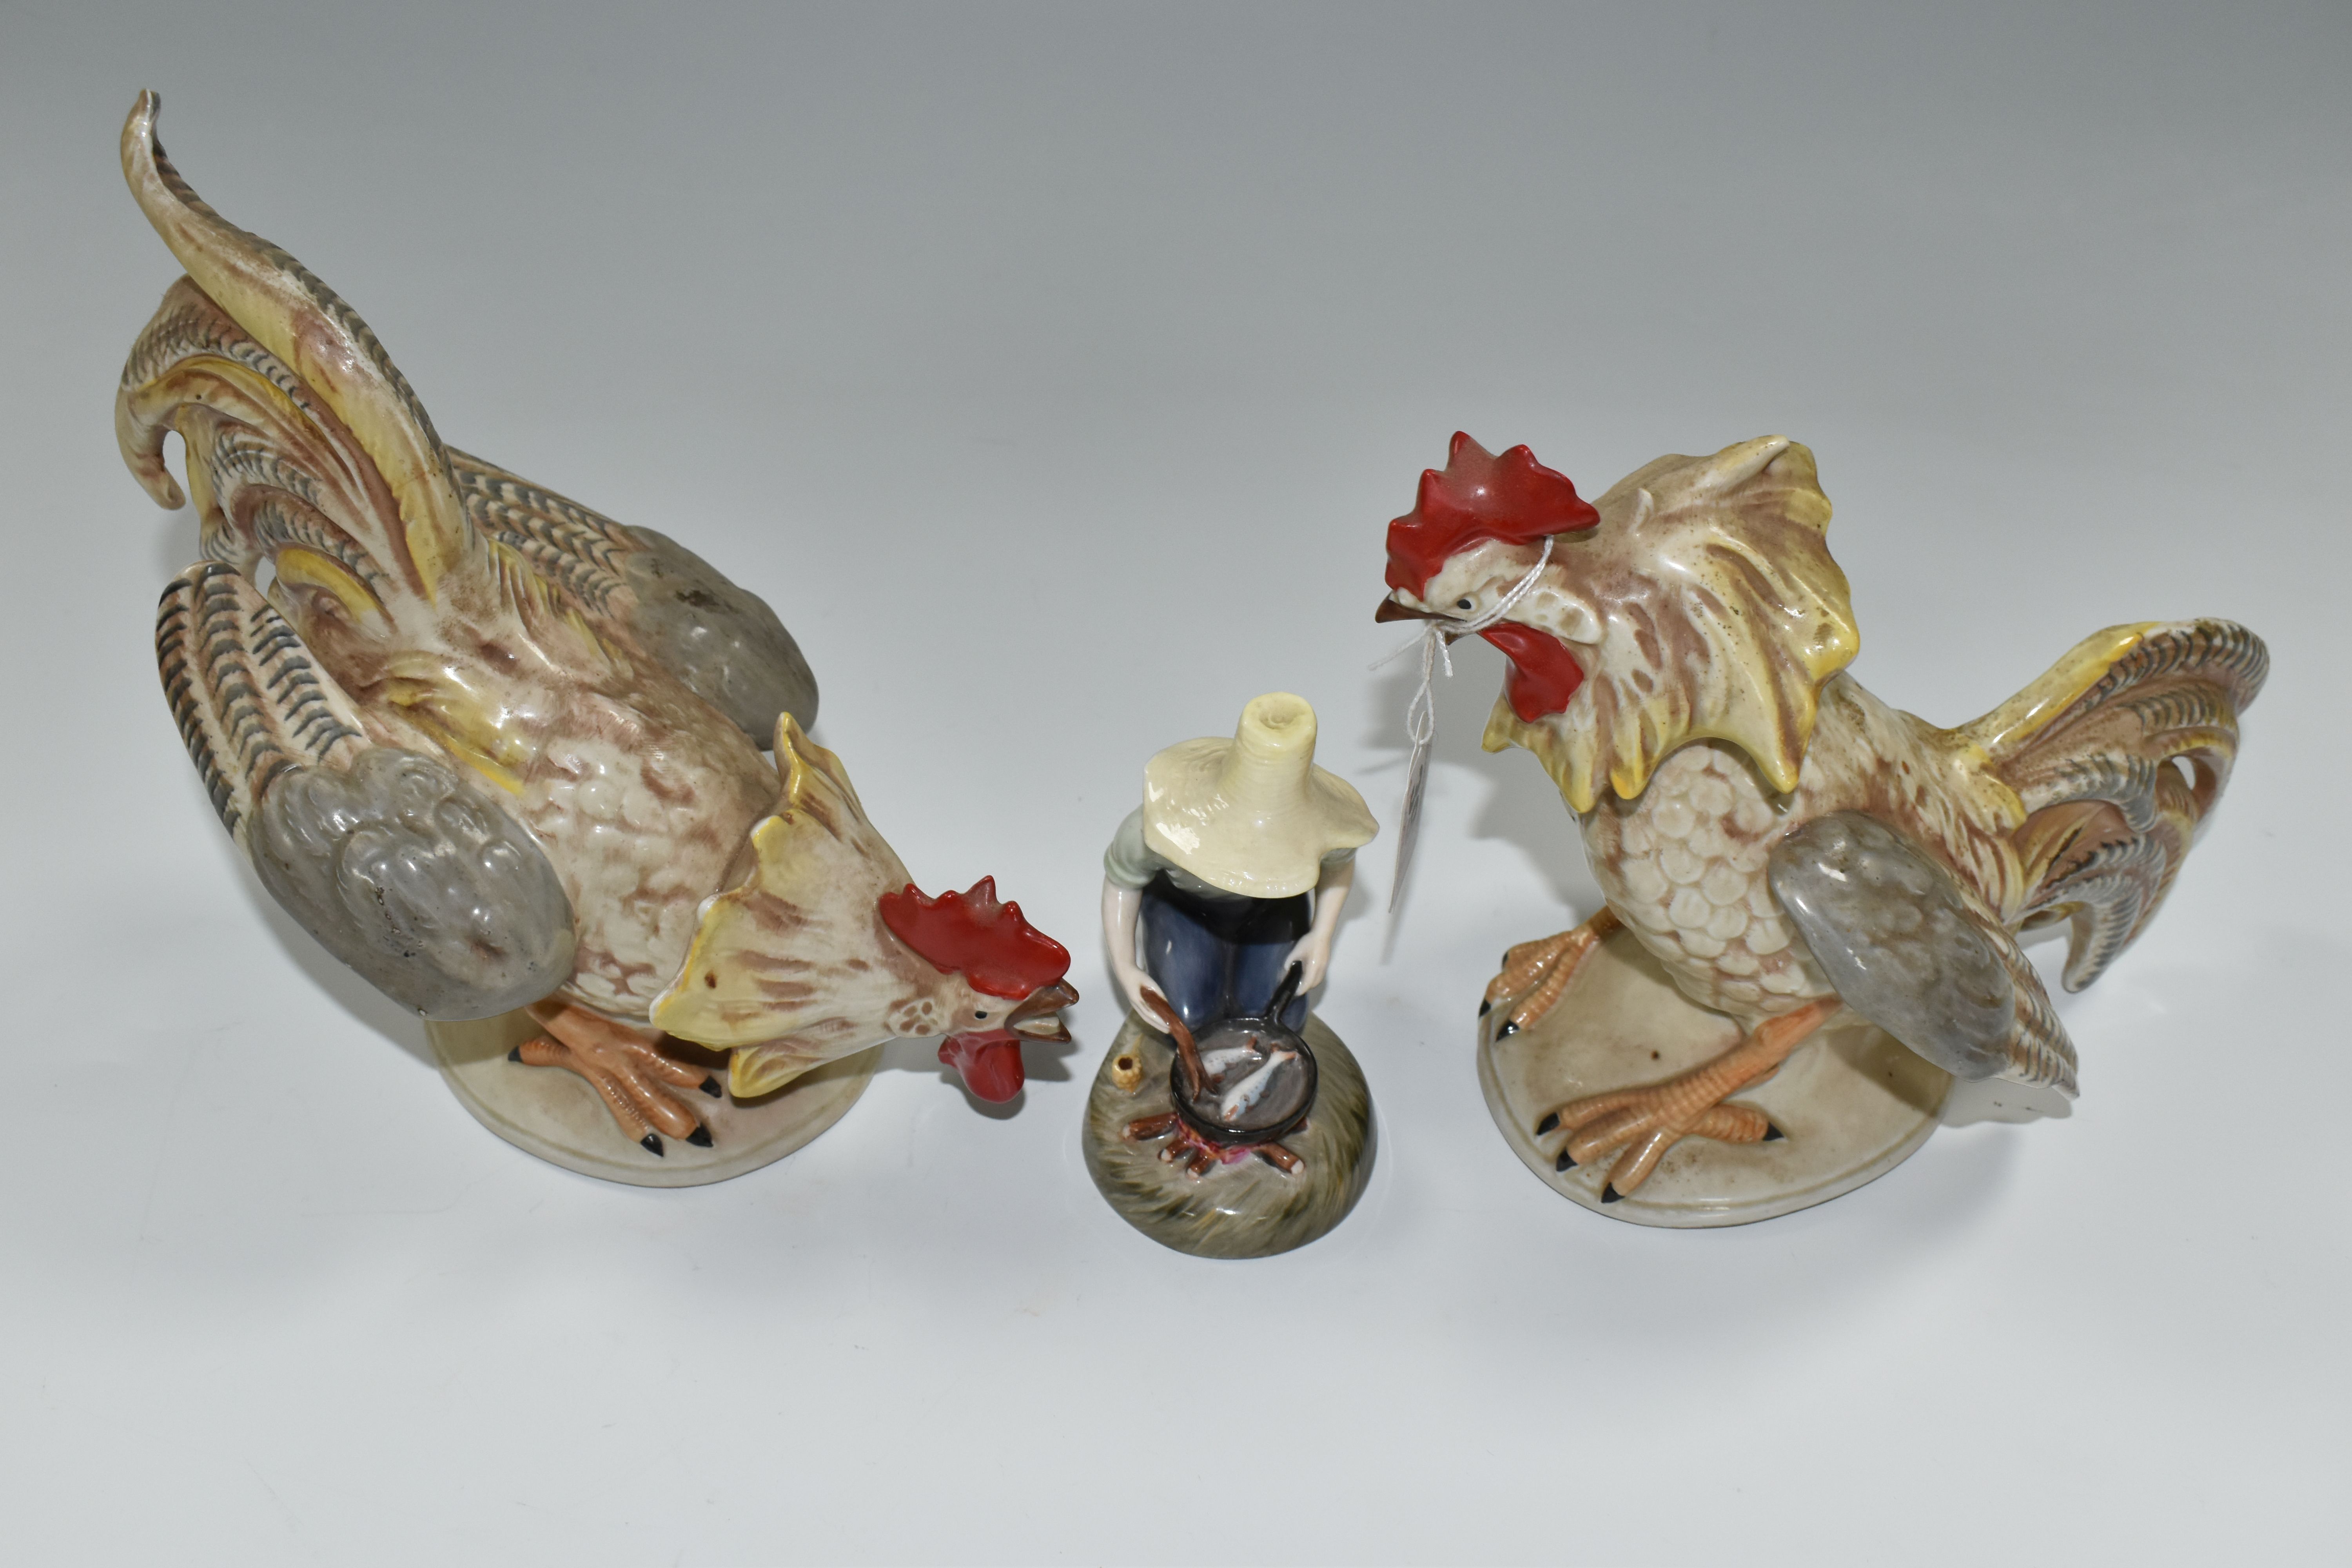 TWO 20TH CENTURY CONTINENTAL PORCELAIN FIGURES OF COCKERELS, posed as ready to fight each other, - Image 4 of 8